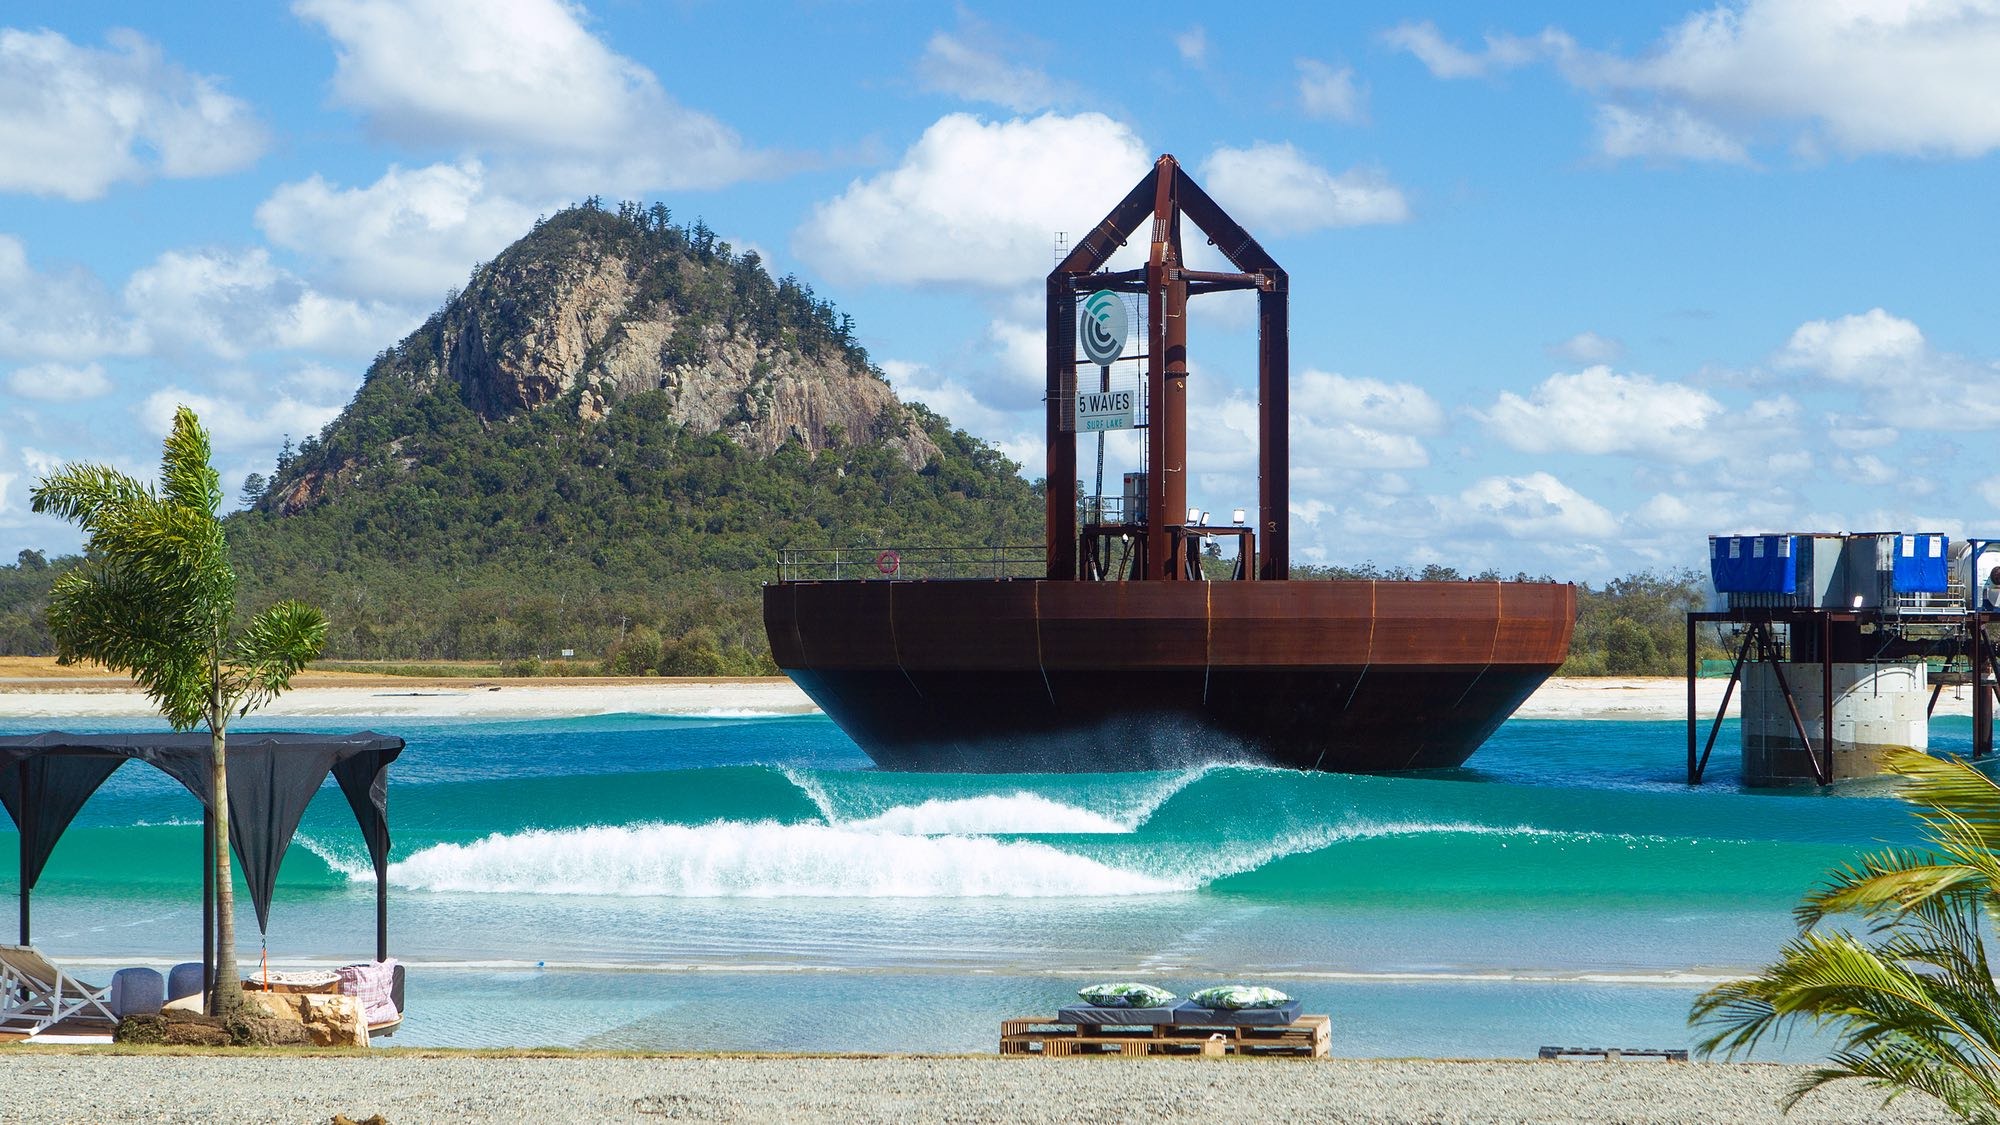 wave pool travel: Image shows giant wave pool plunger and mountain backdrop at Surf lakes in Yeppoon Australia